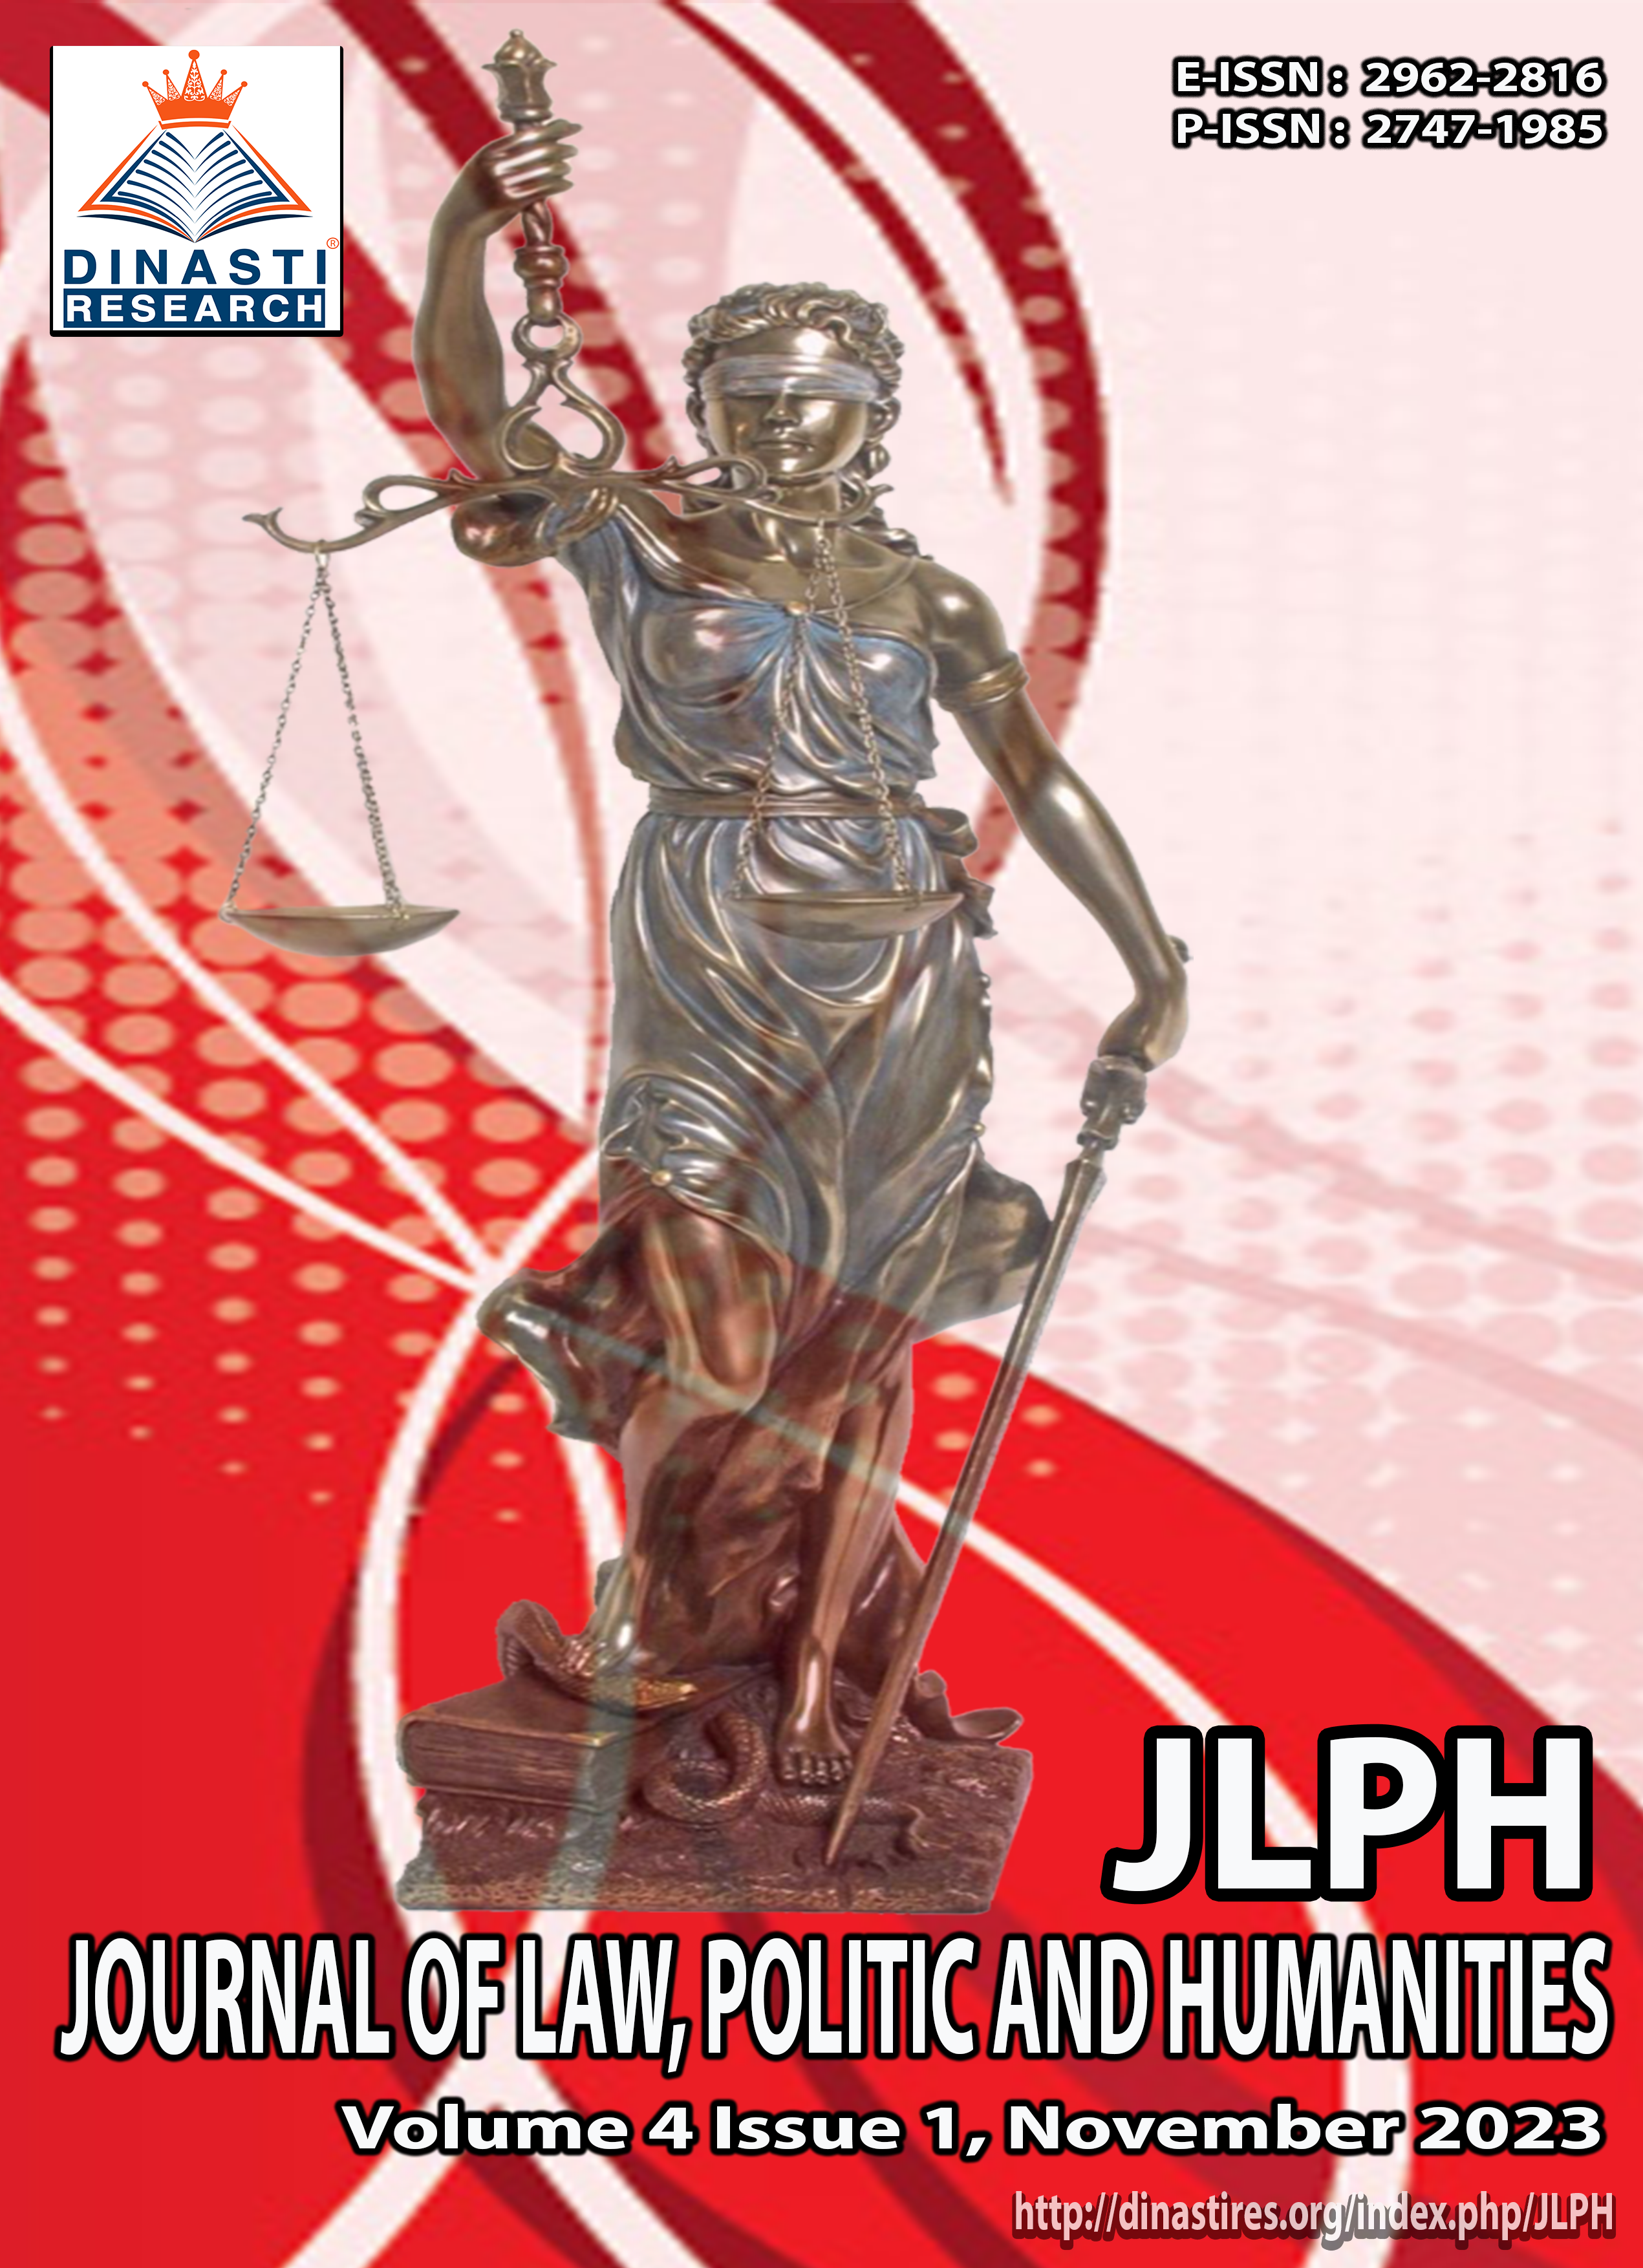 					View Vol. 4 No. 1 (2023): (JLPH) Journal of Law, Politic and Humanities (November - December 2023)
				